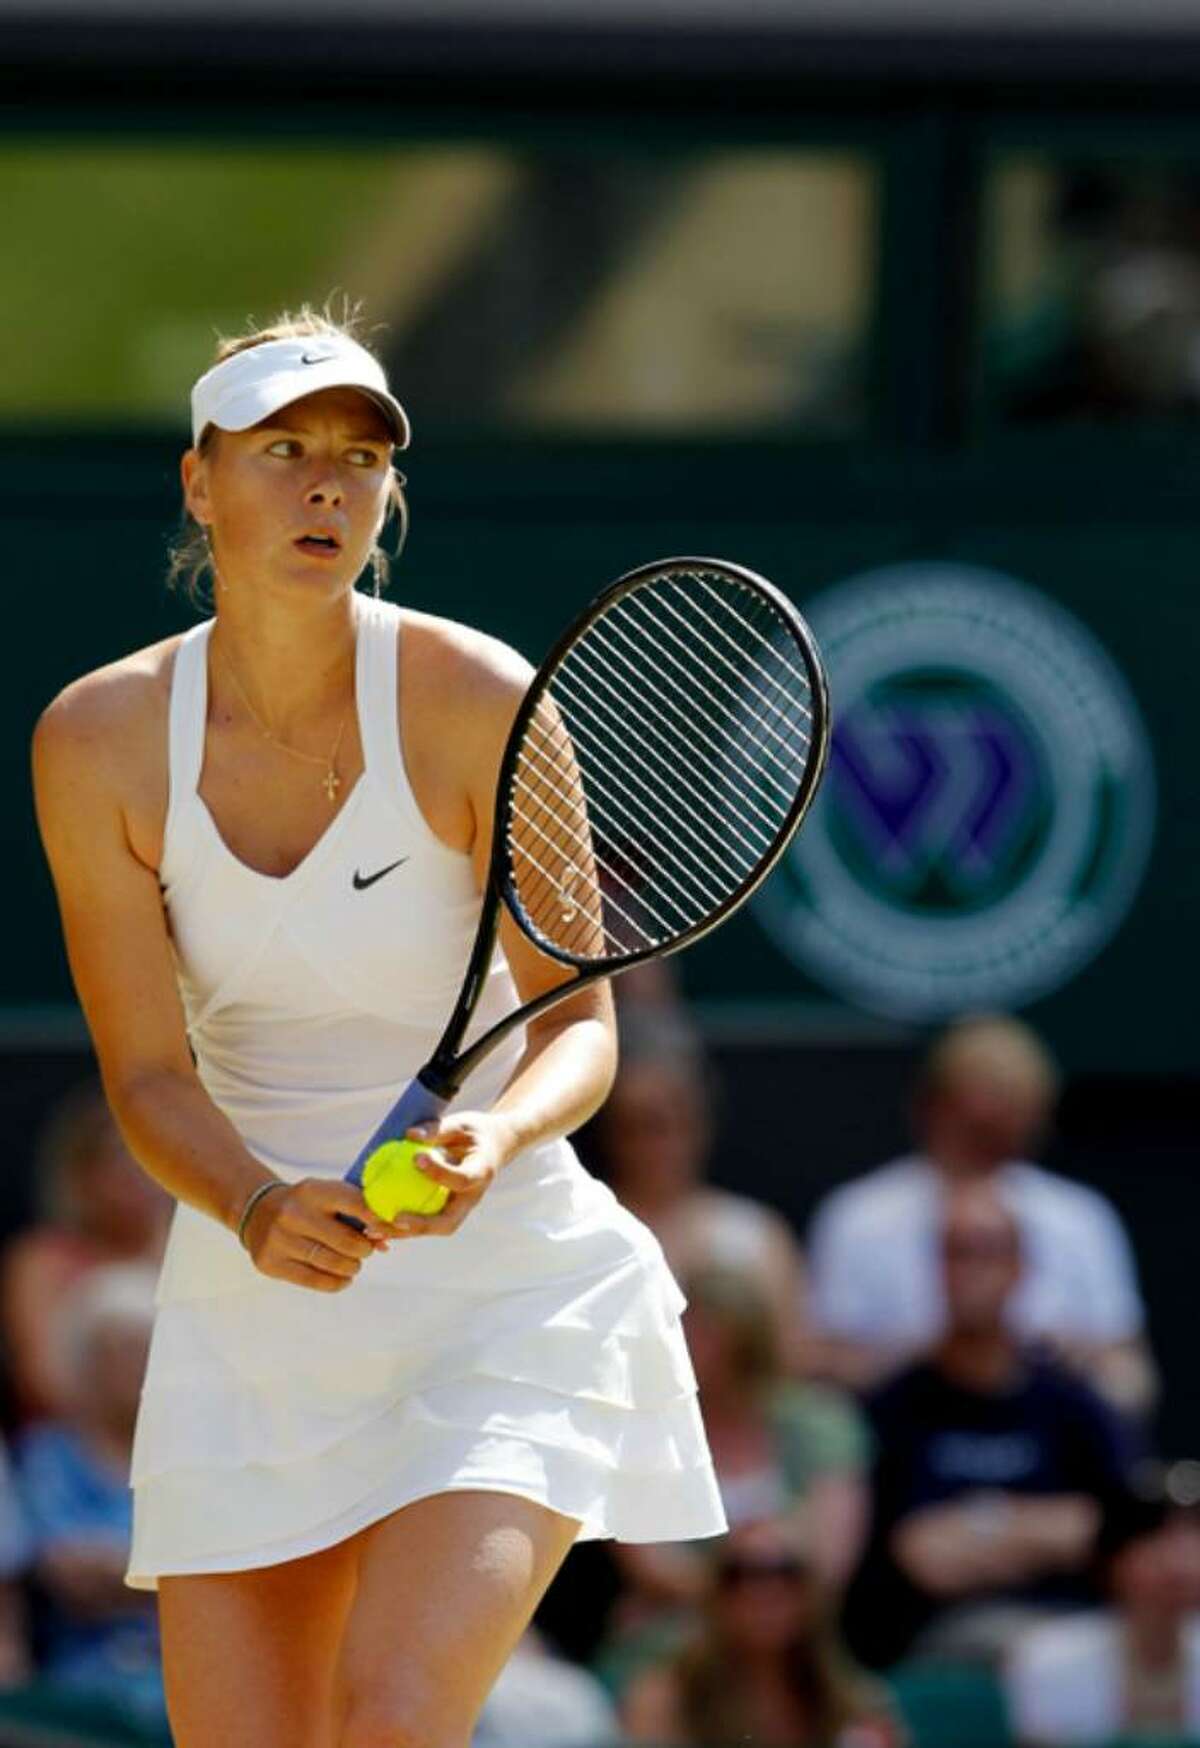 Maria Sharapova of Russia in action during her match against Serena Williams of USA on Day Seven of the Wimbledon Lawn Tennis Championships at the All England Lawn Tennis and Croquet Club on June 28, 2010 in London, England.